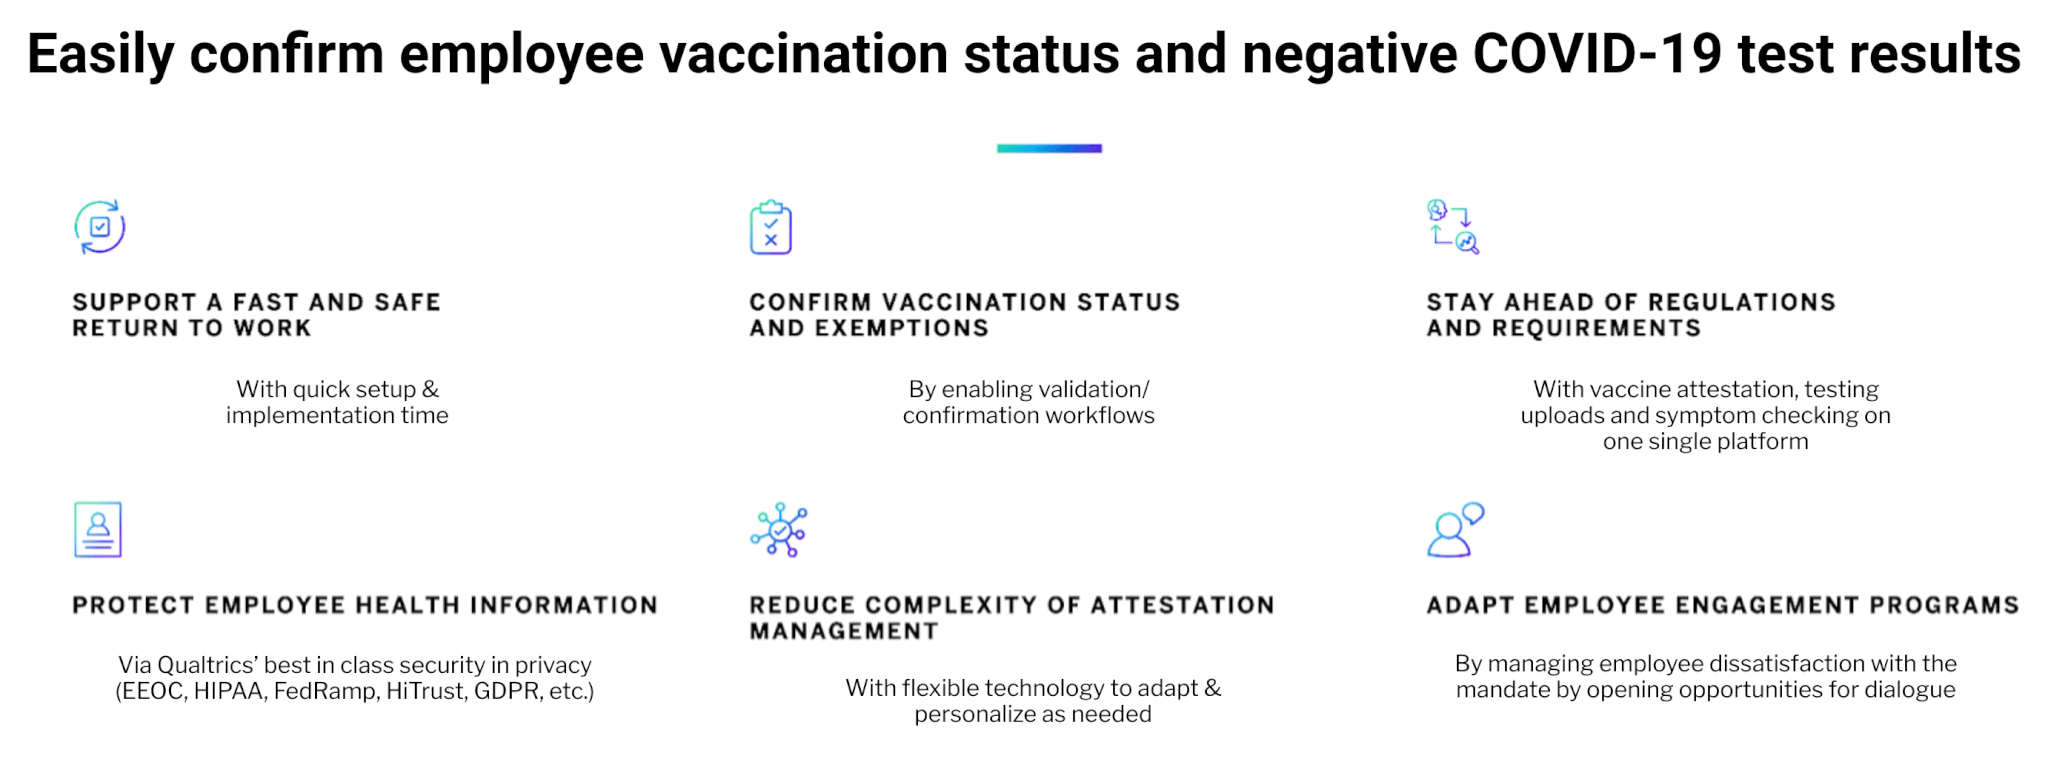 Easily confirm employee vaccination status and negative COVID-19 test results